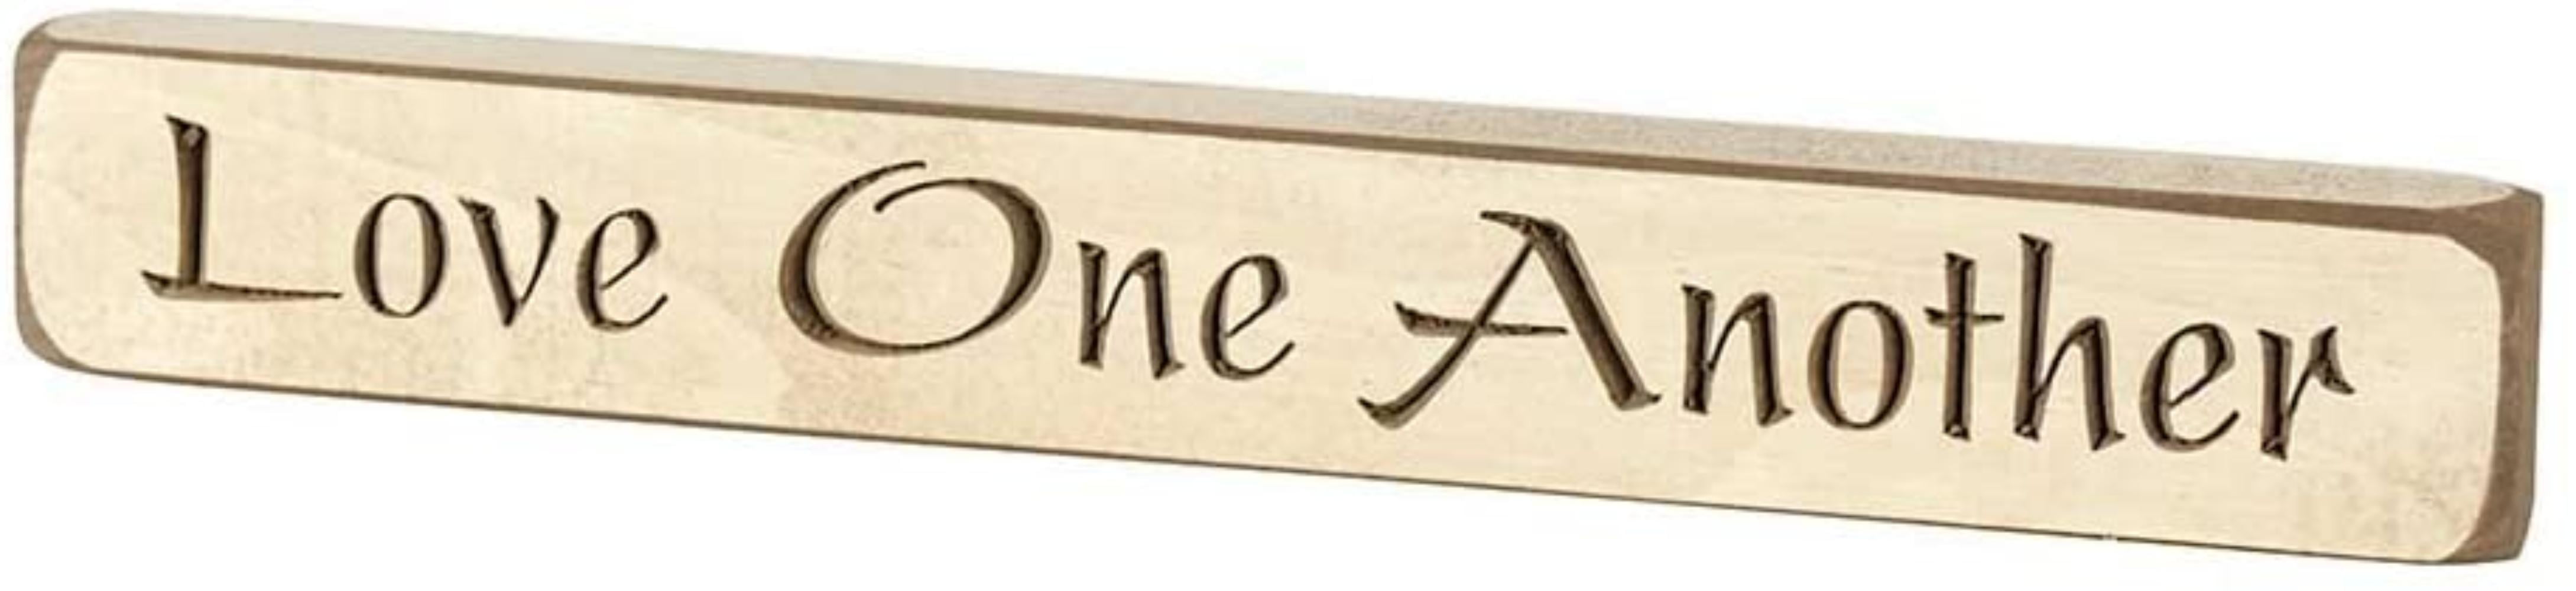 Dicksons Love One Another Antique White 12 x 2 Wood Tabletop Plaque 